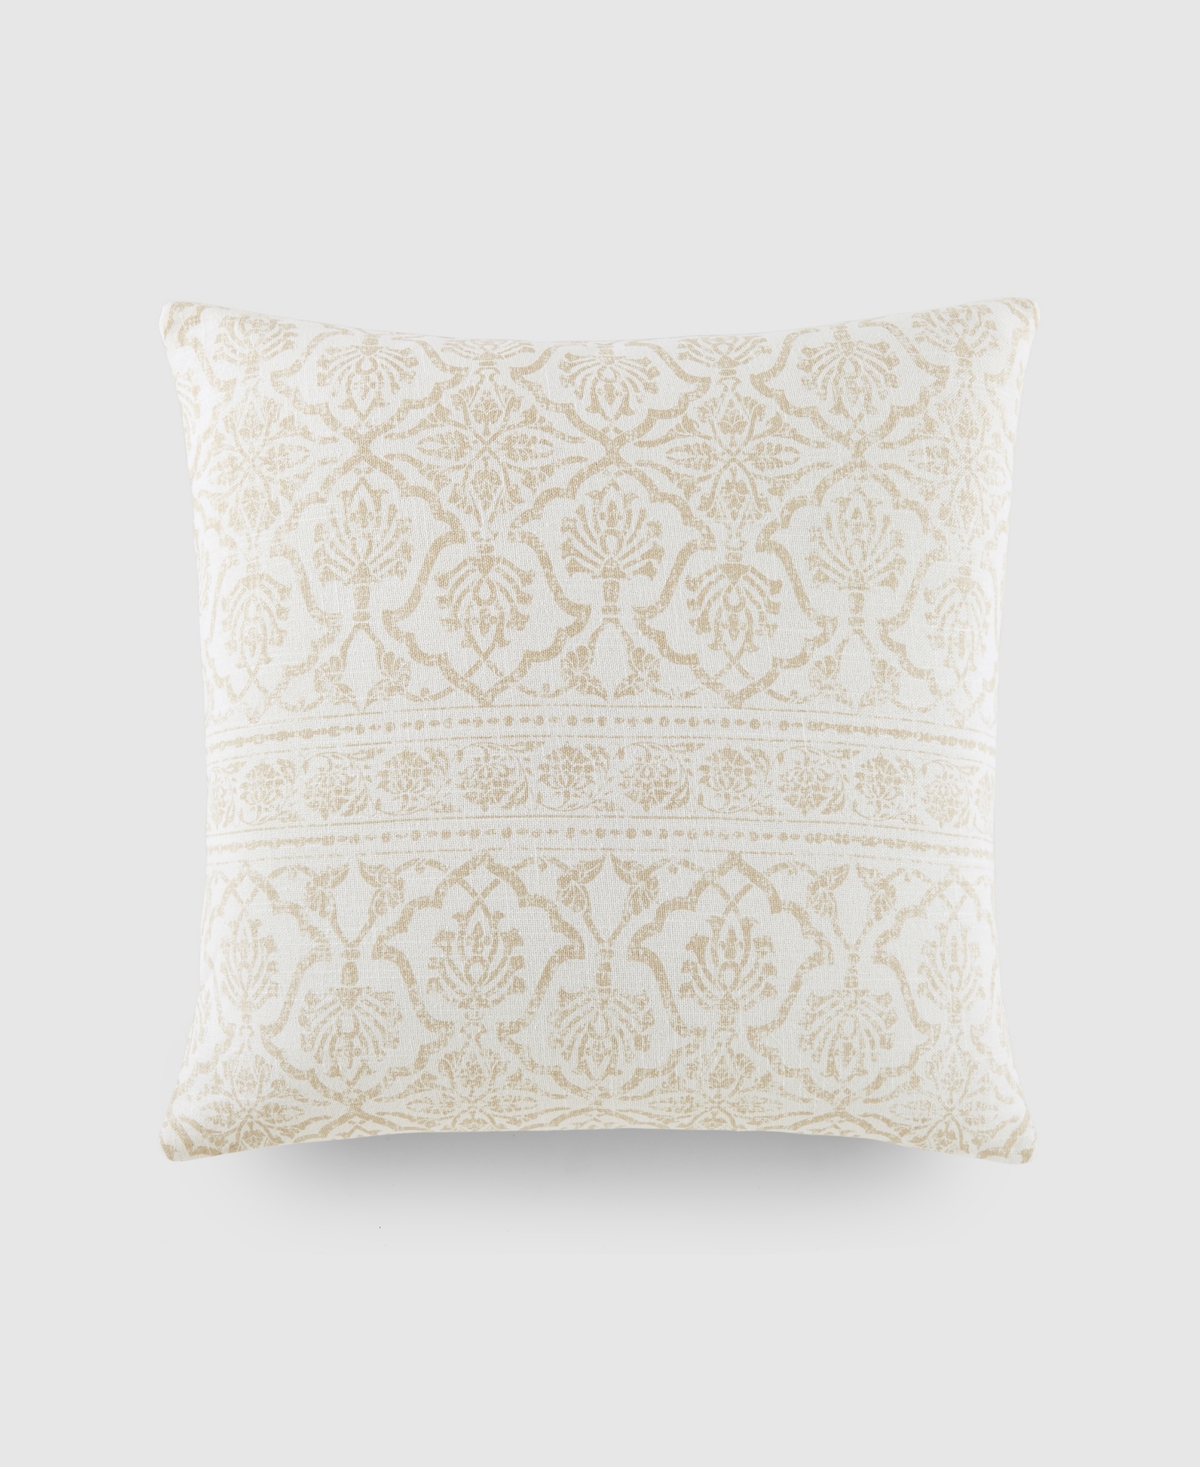 Ienjoy Home Damask Printed Decorative Pillow, 20" X 20" In Cream Damask